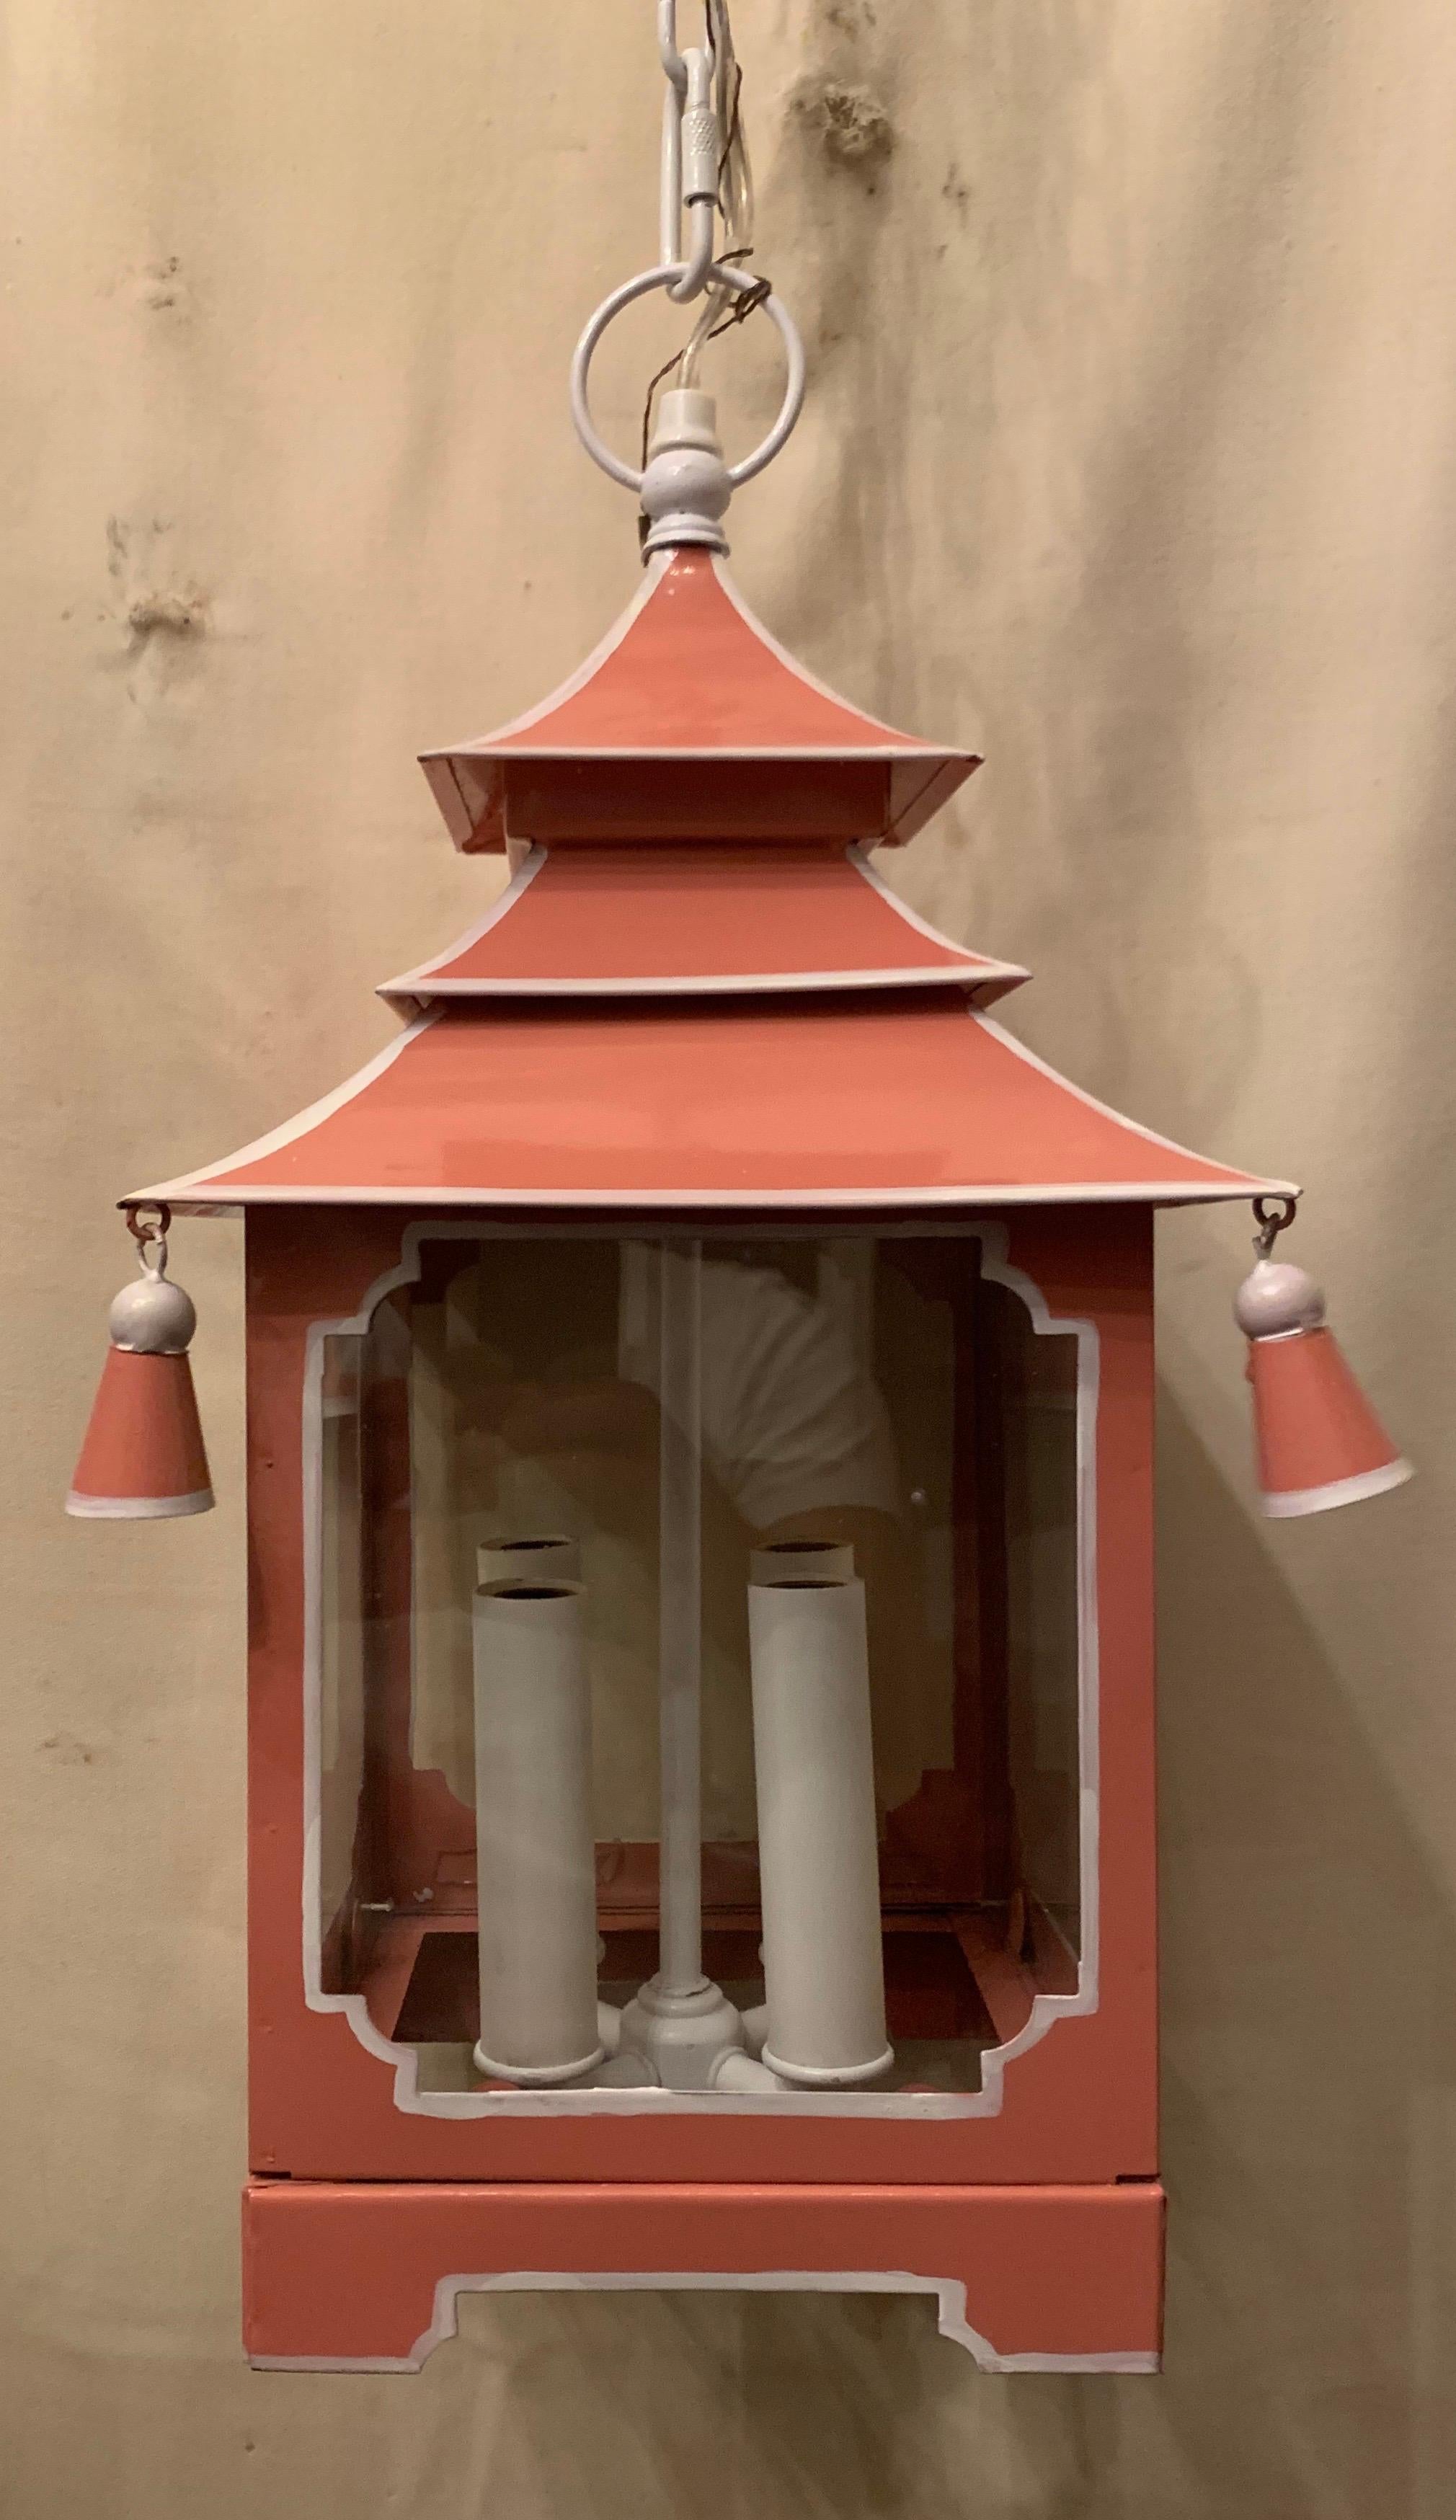 Wonderful chinoiserie pagoda square salmon pink and white contrast trim enameled paint and glass panel 4 light lantern fixture, completely rewired and ready to install with chain canopy and mounting hardware
details.
  